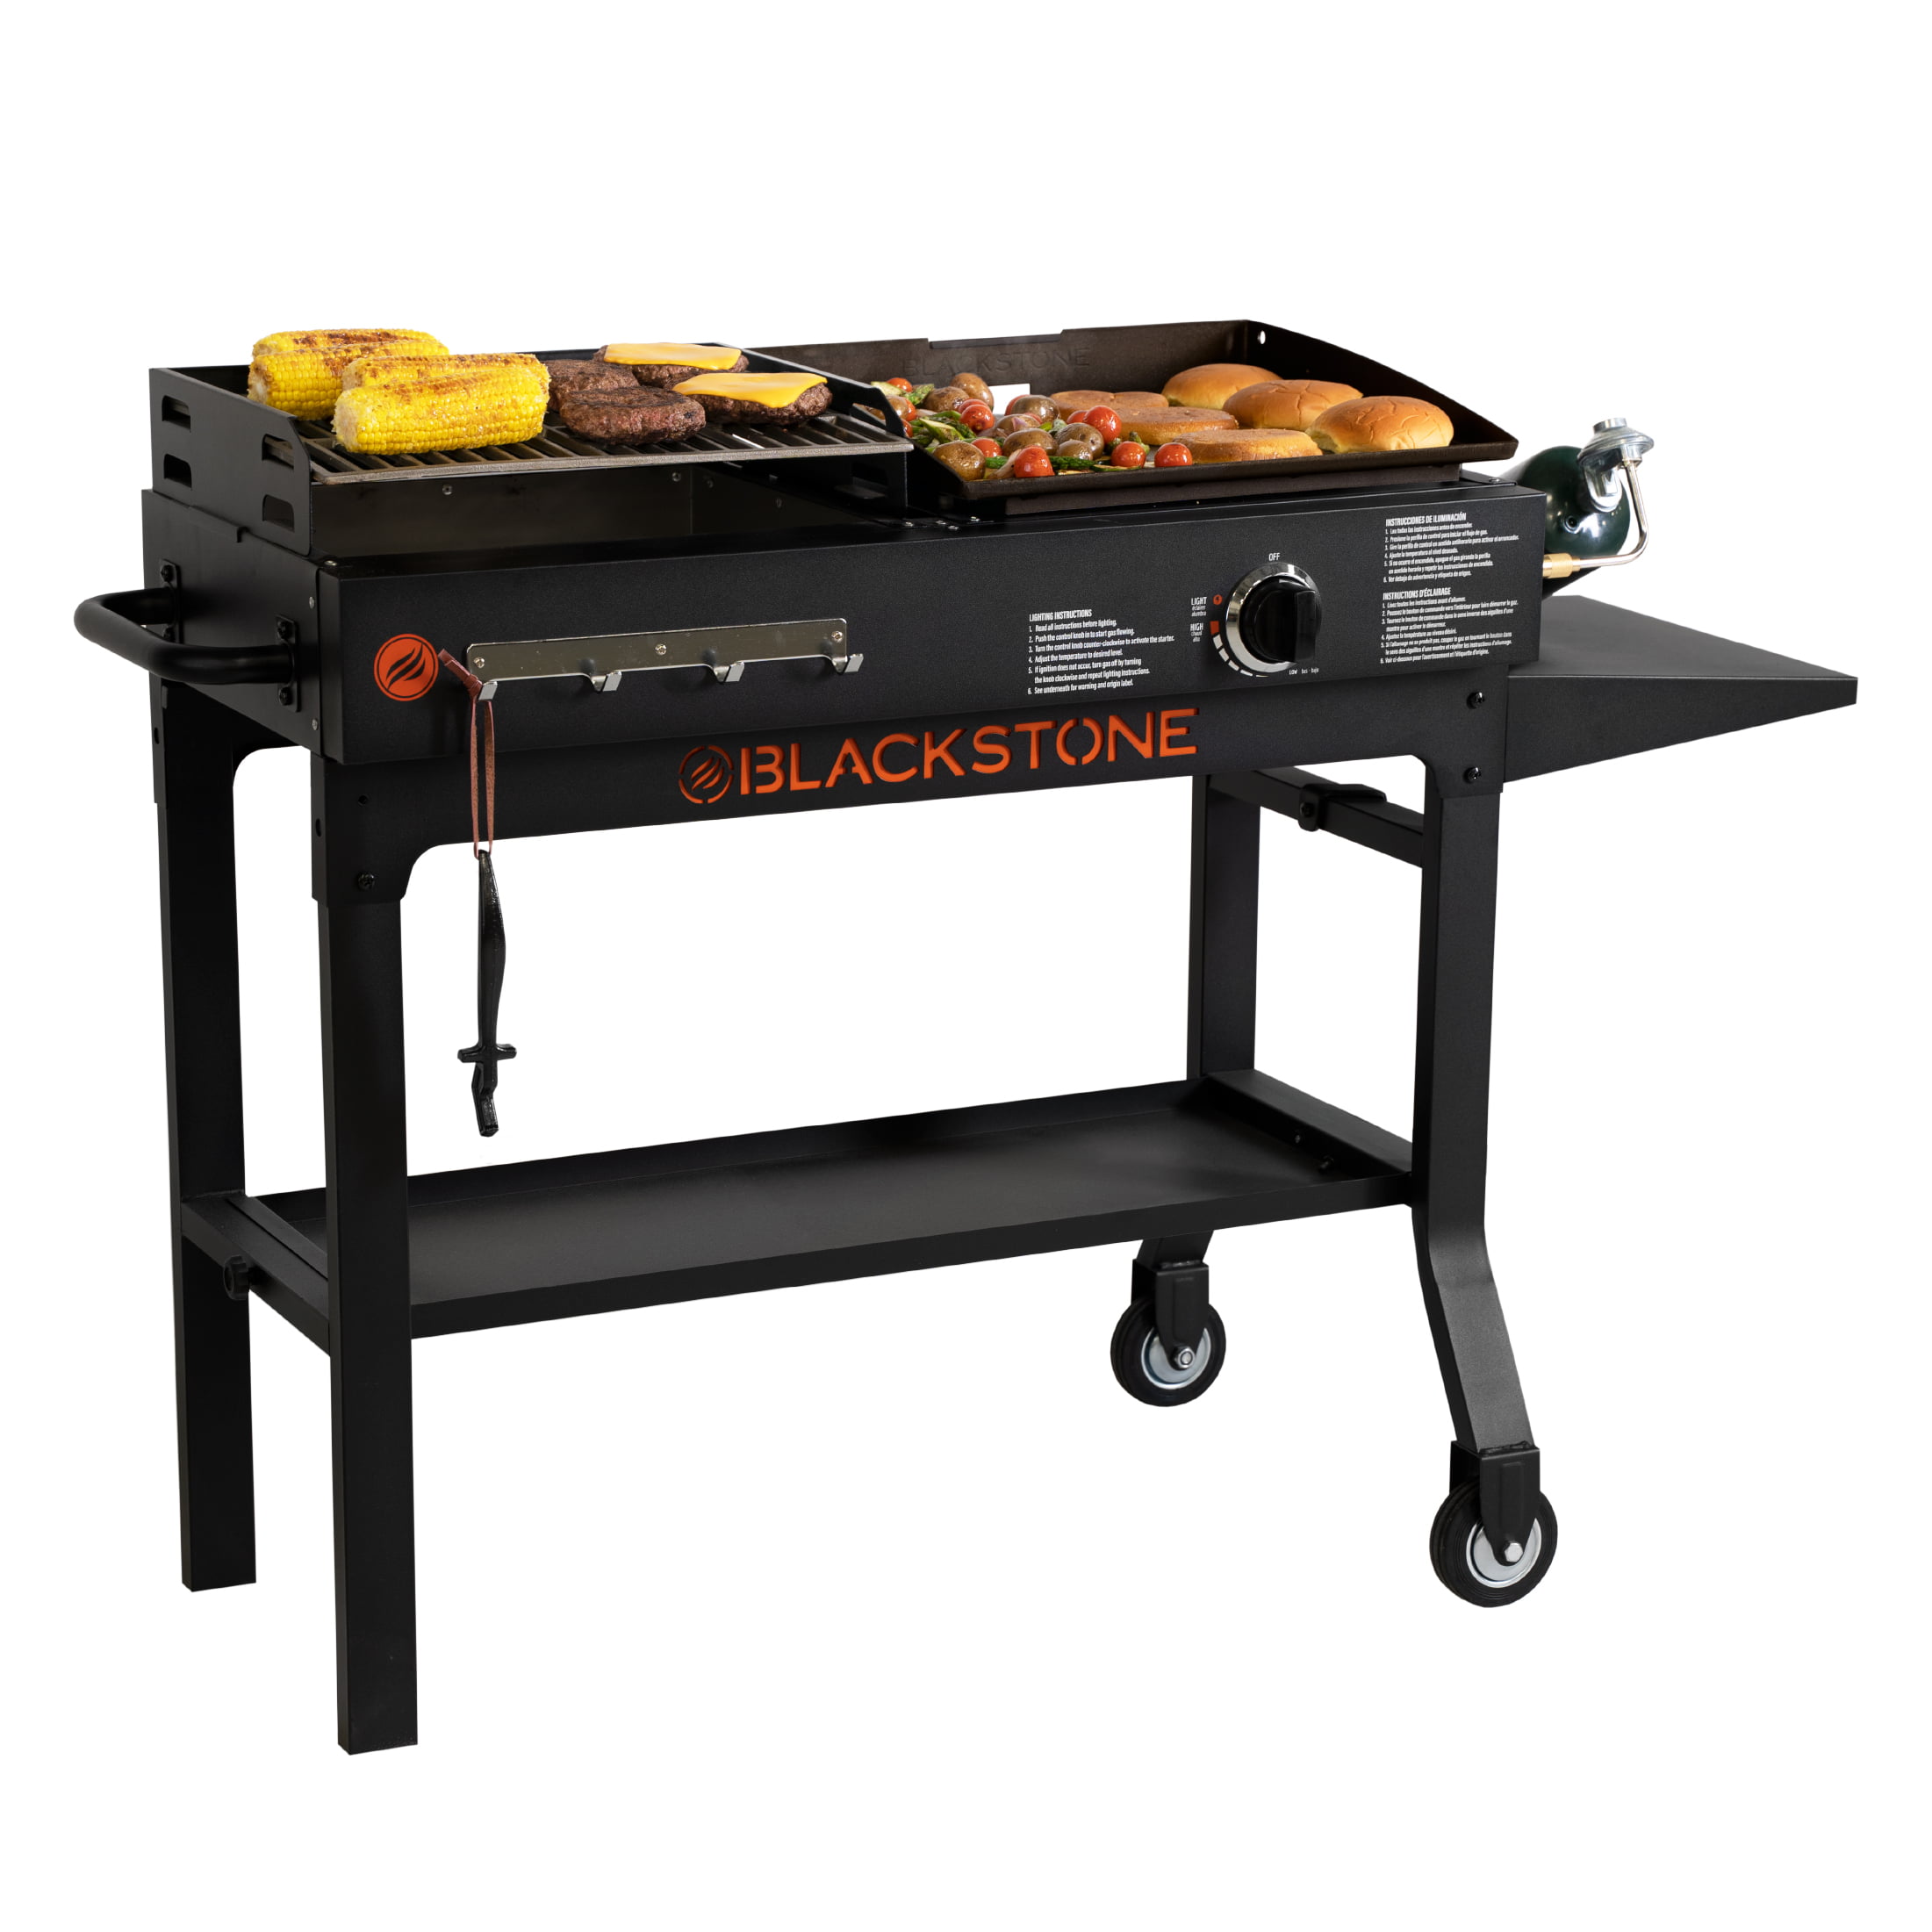 17" Blackstone Duo Griddle & Charcoal Grill Combo $180 + Free Shipping